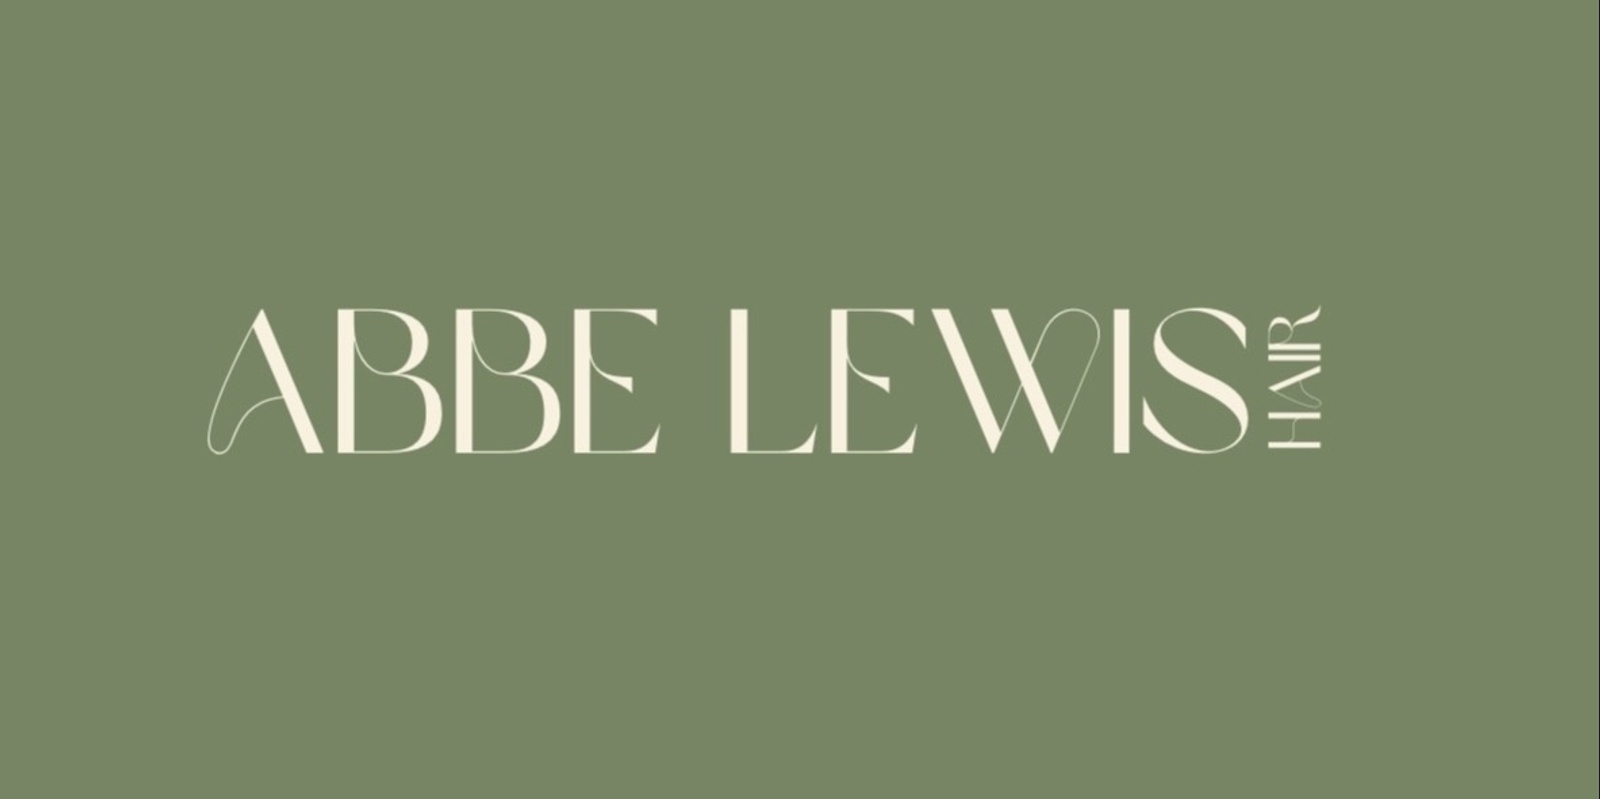 Abbe Lewis's banner